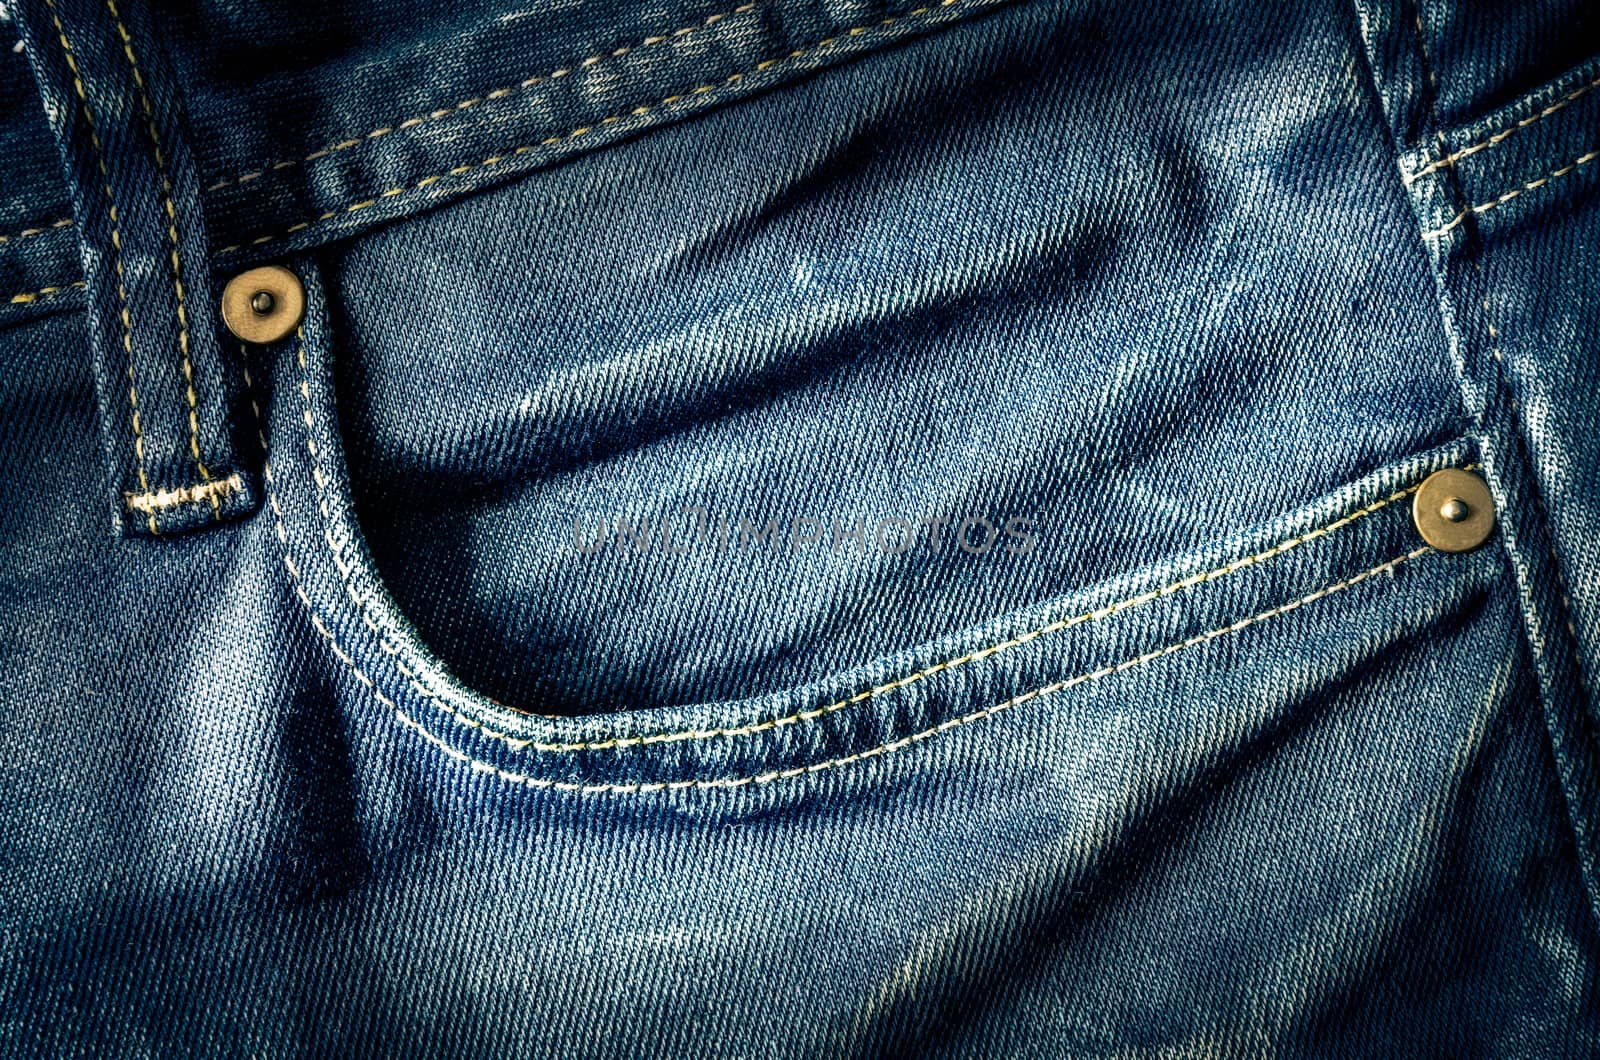 Detail of blue jeans pocket in vintage style by martinm303